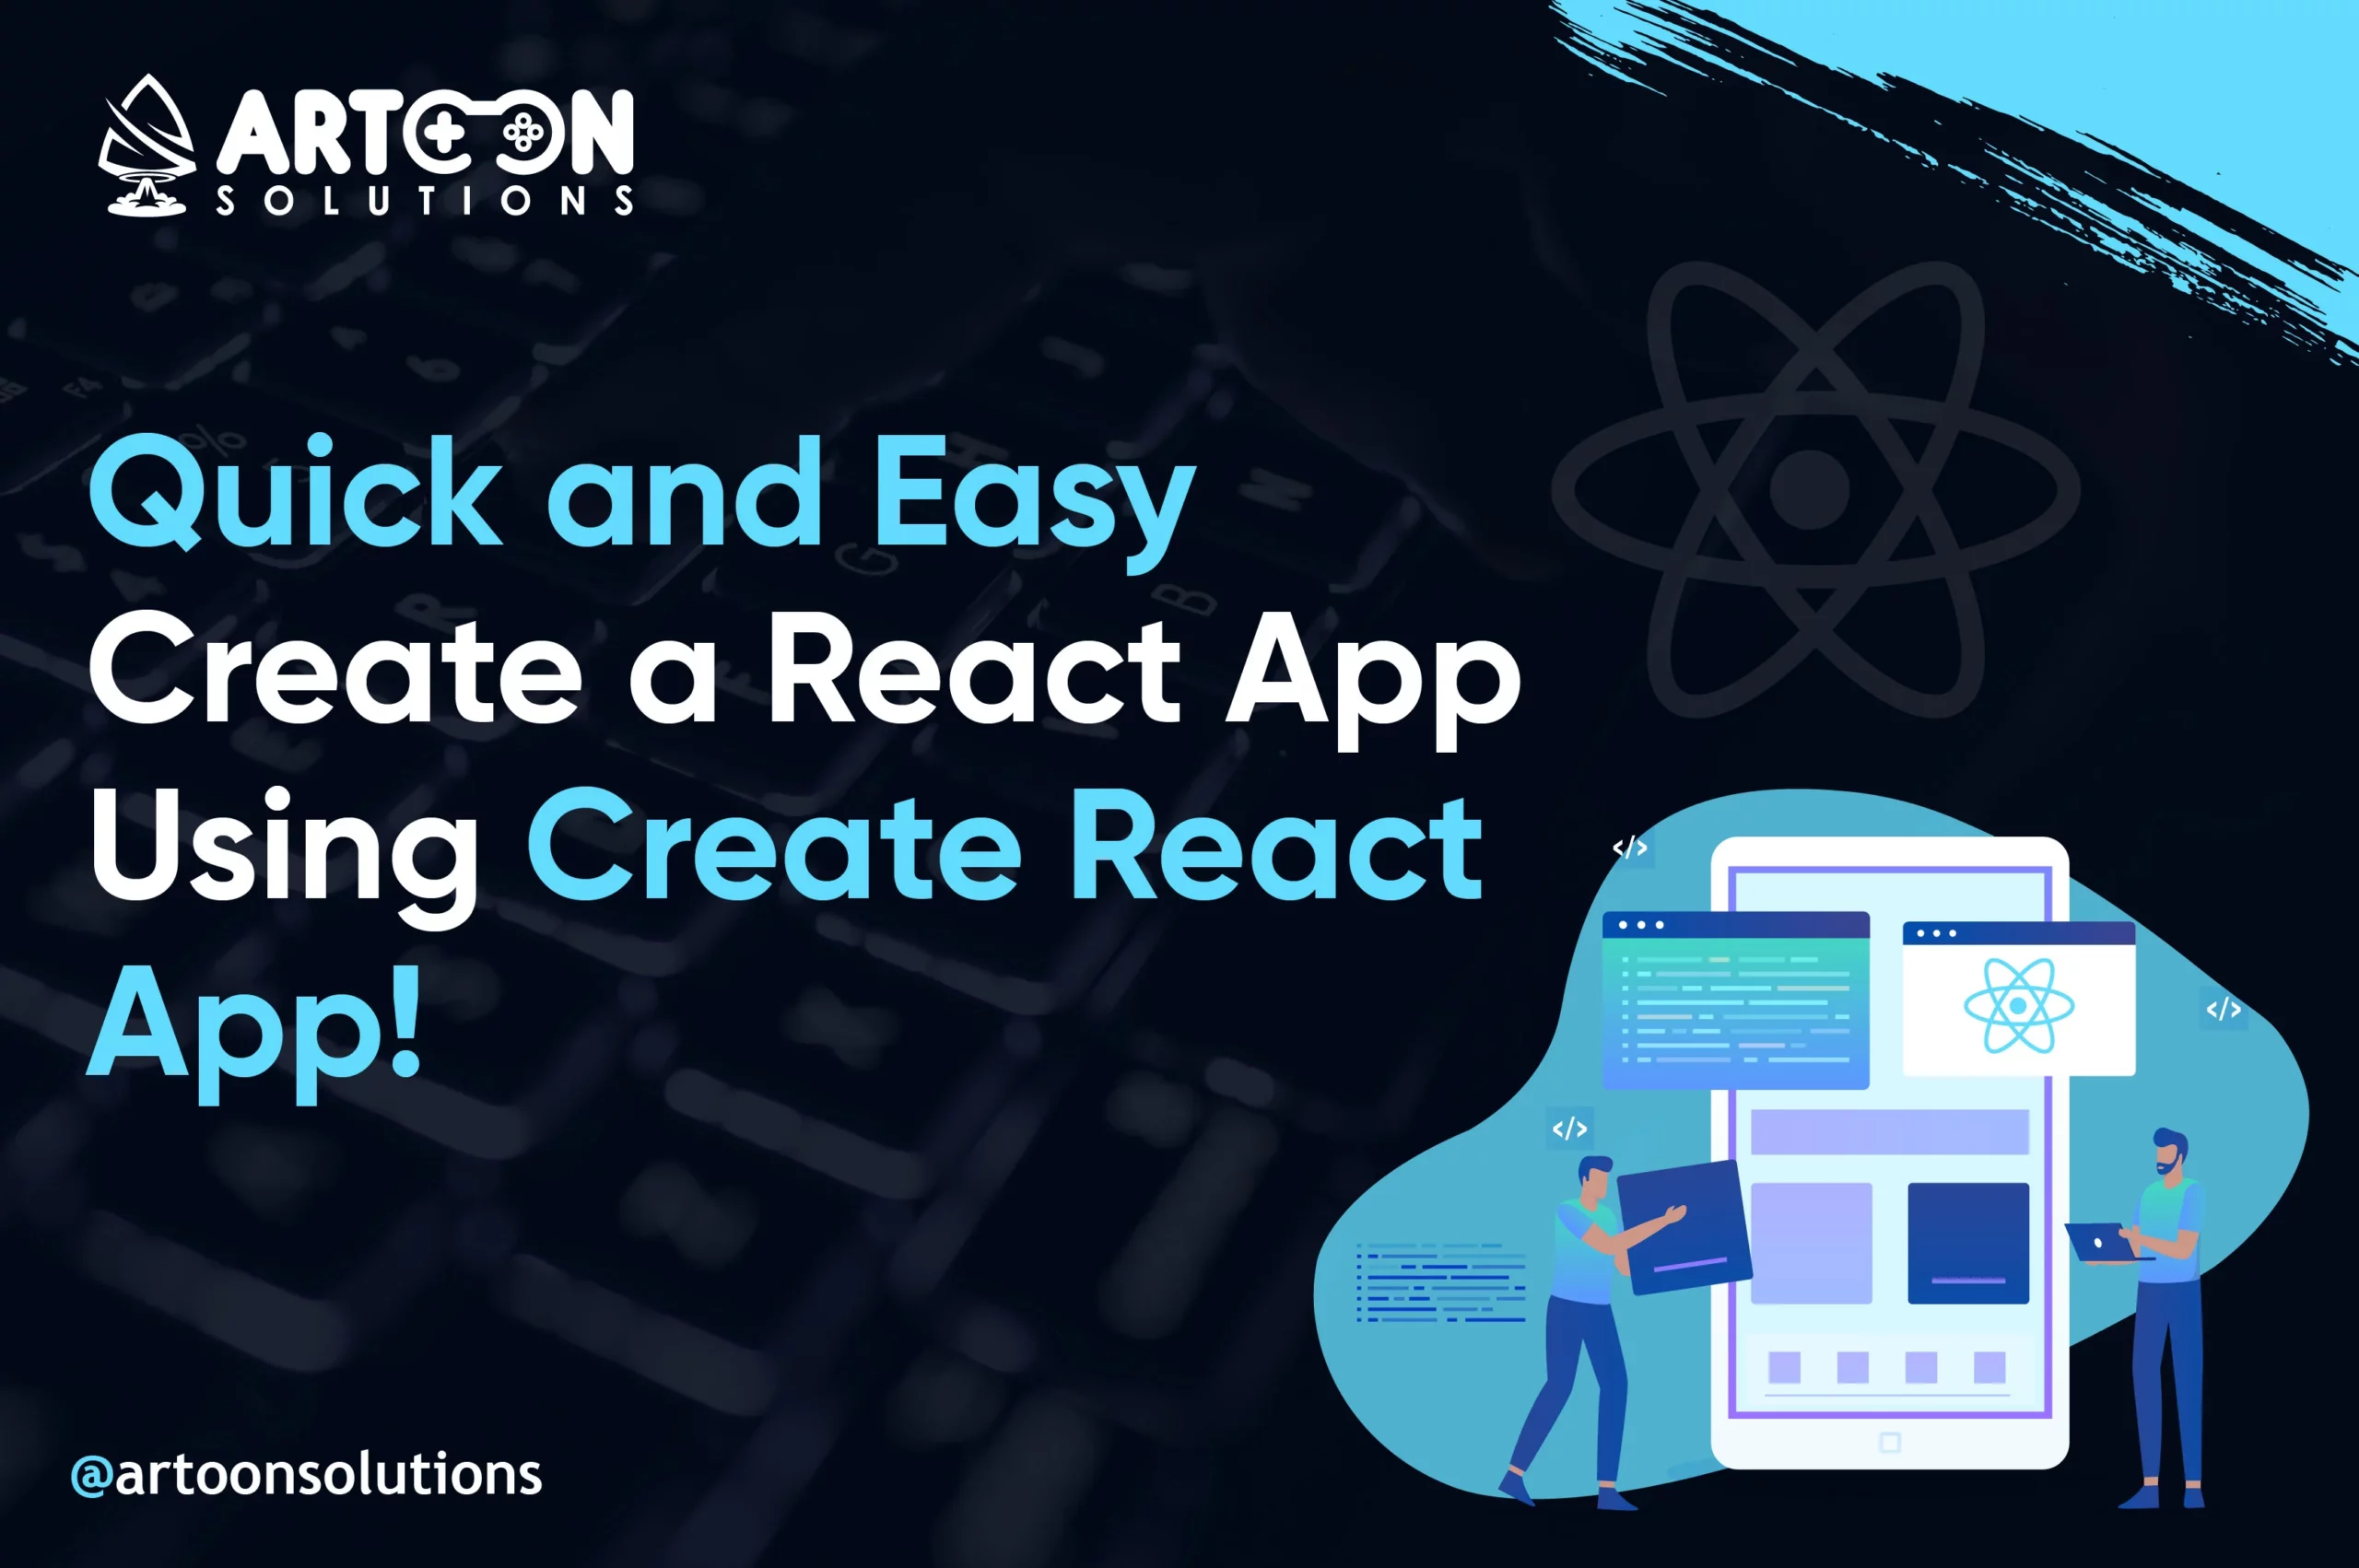 Build Your First App with Create React App